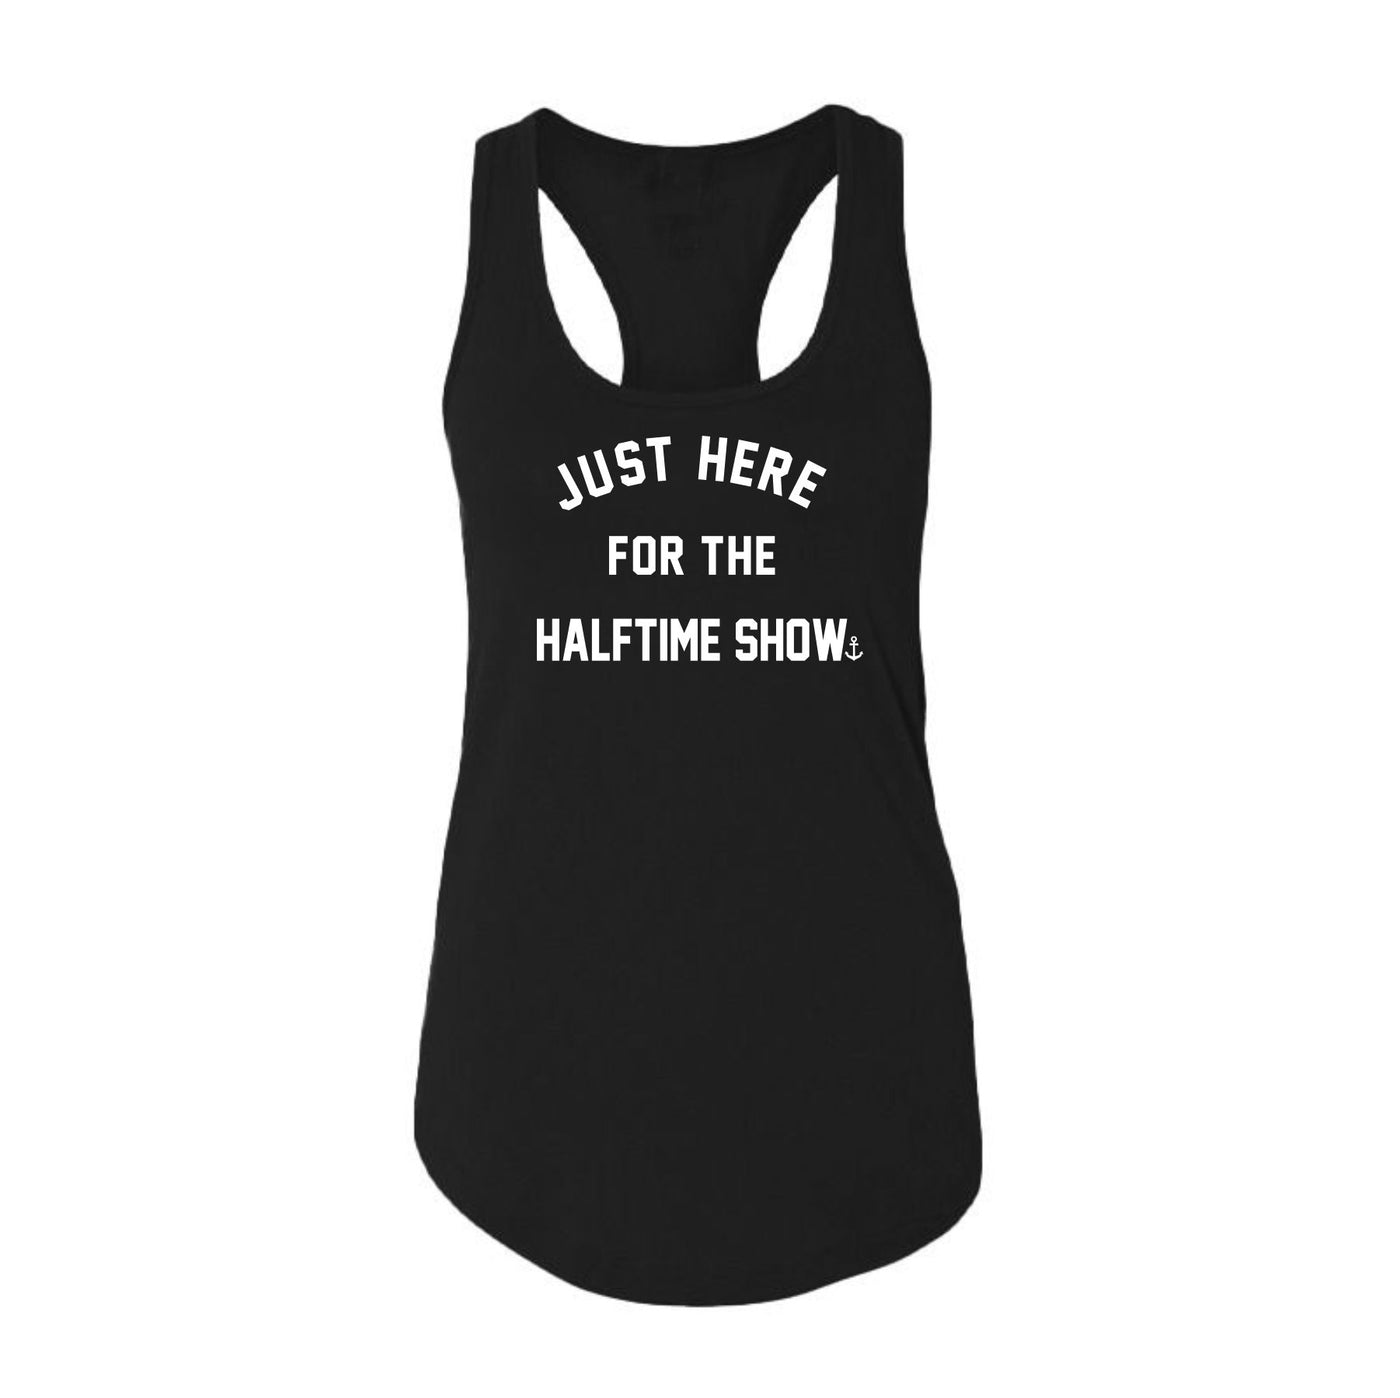 "Just Here For The Halftime Show" Ladies' Tank Top